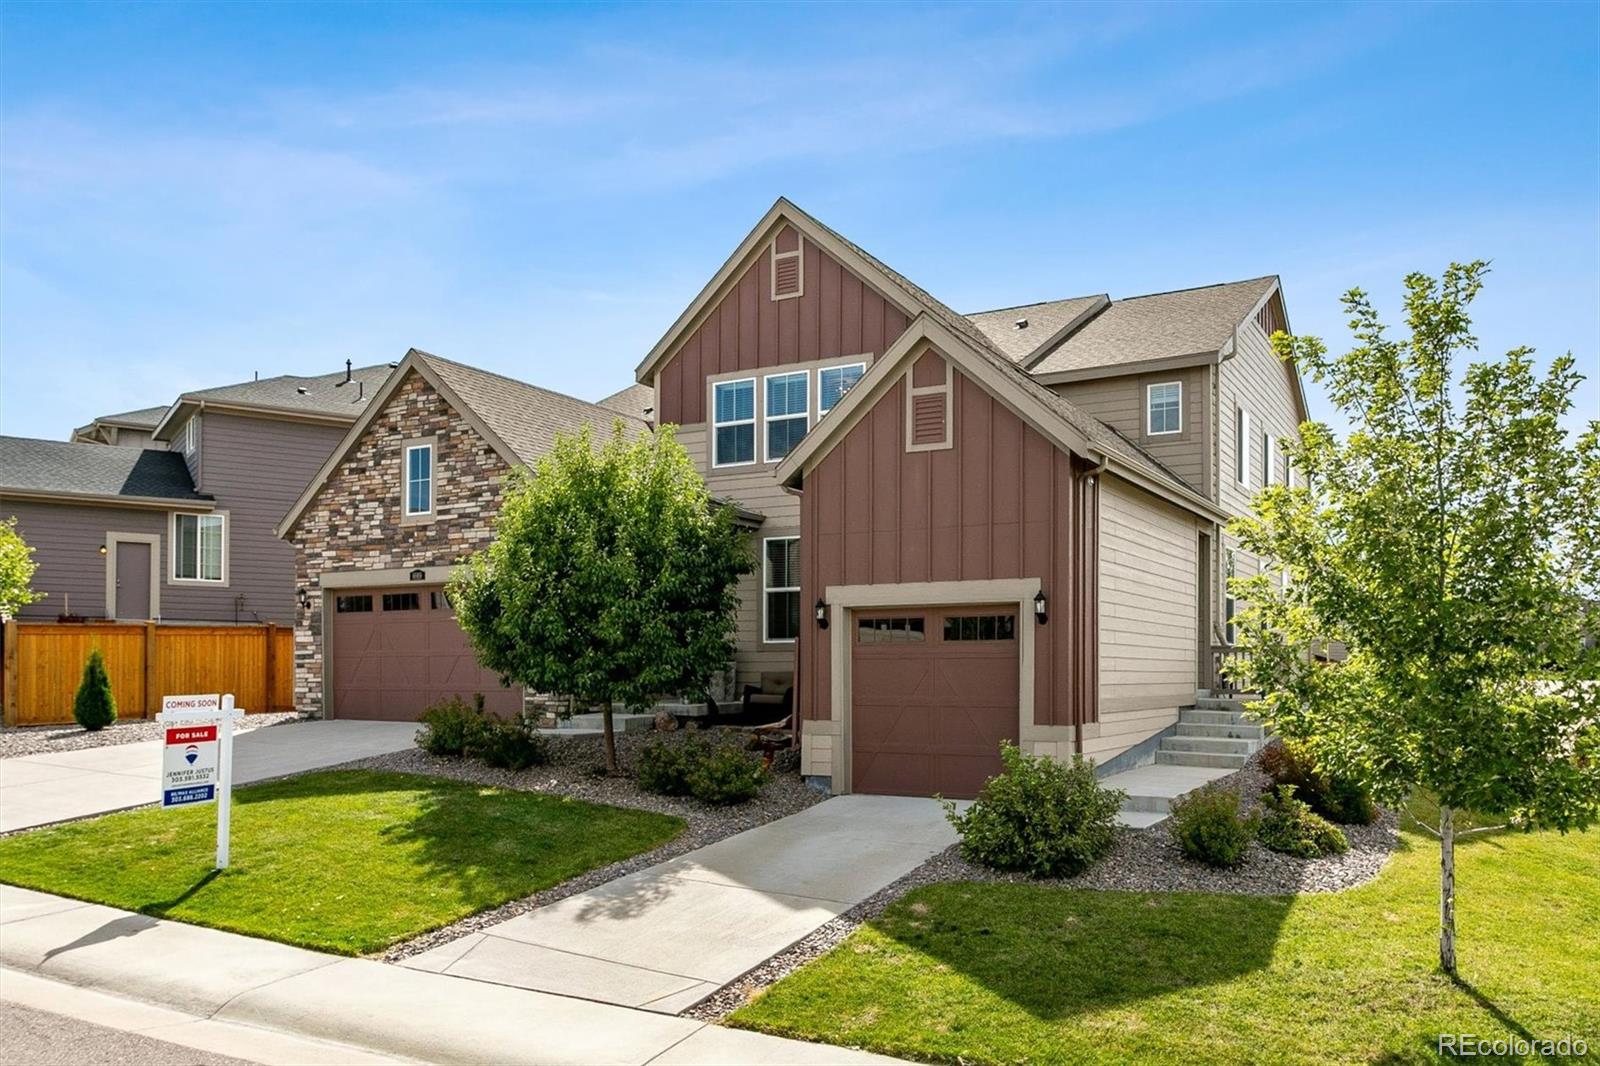 Report Image for 6919  Hyland Hills Street,Castle Pines, Colorado